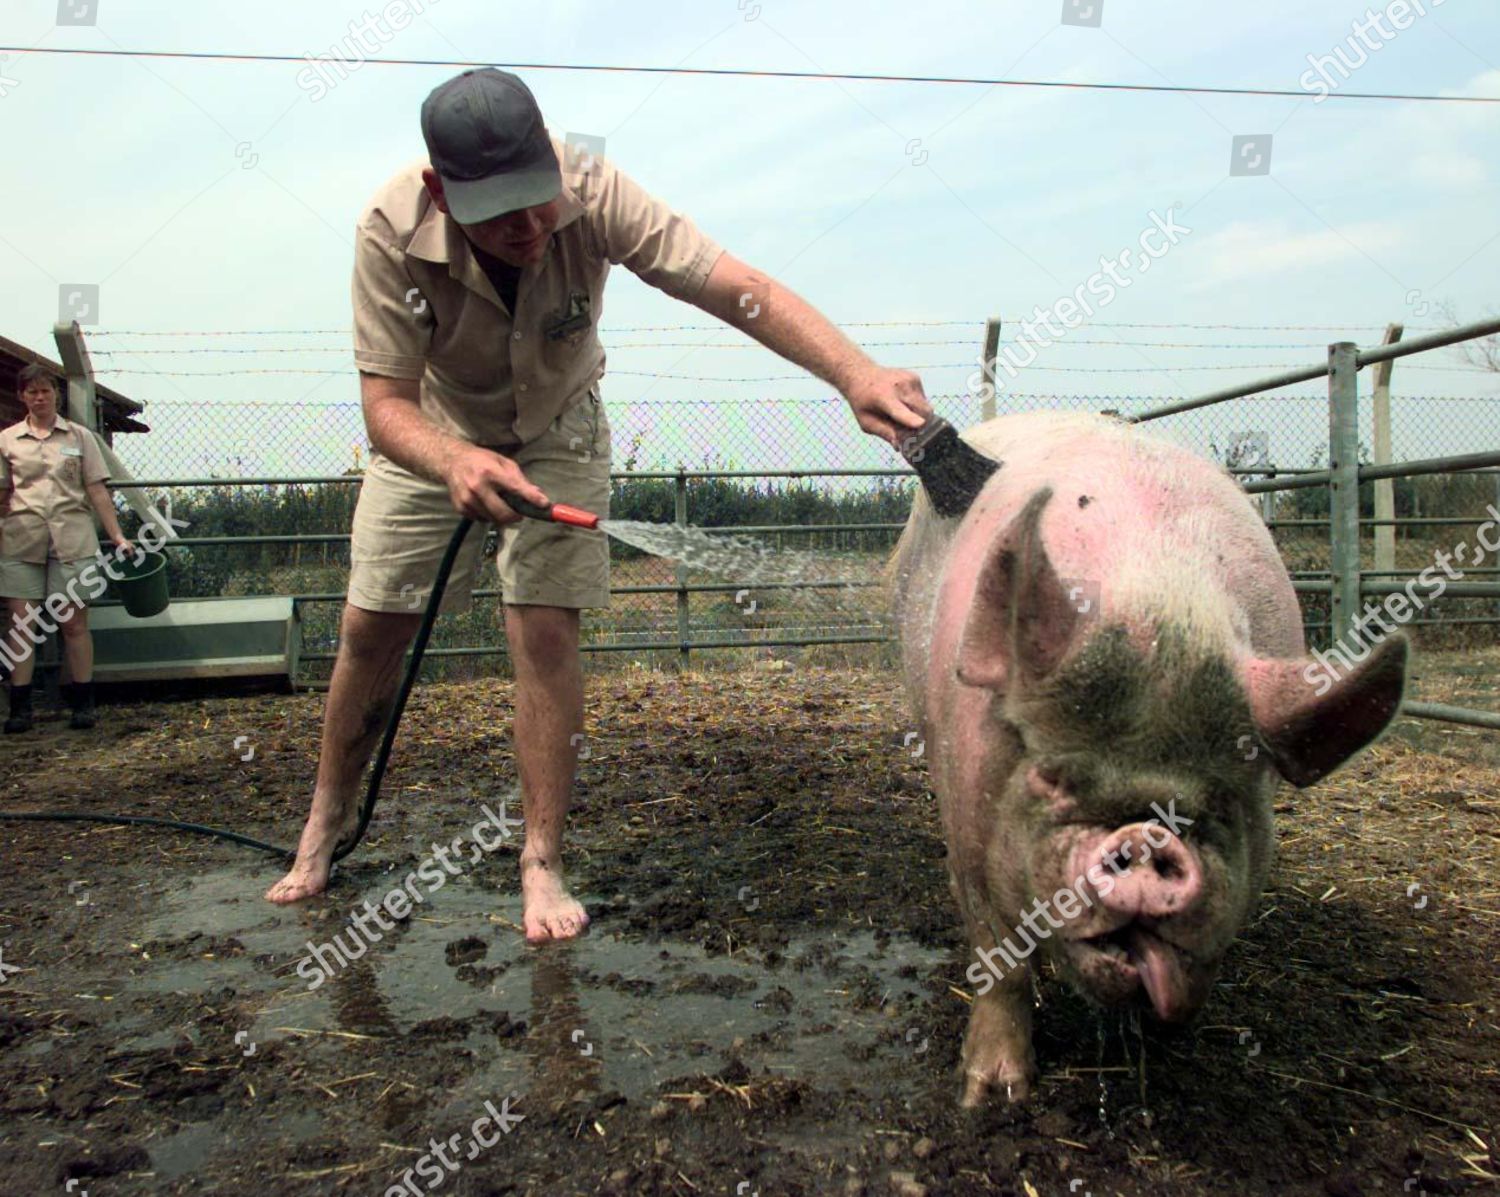 farm-hand-shaun-jarvice-cools-off-mabel-a-middle-white-sow-after-a-mud-bath-with-a-welcome-hosing-down-at-thorpe-park-farm-in-surrey-shutterstock-editorial-2090920a.jpg